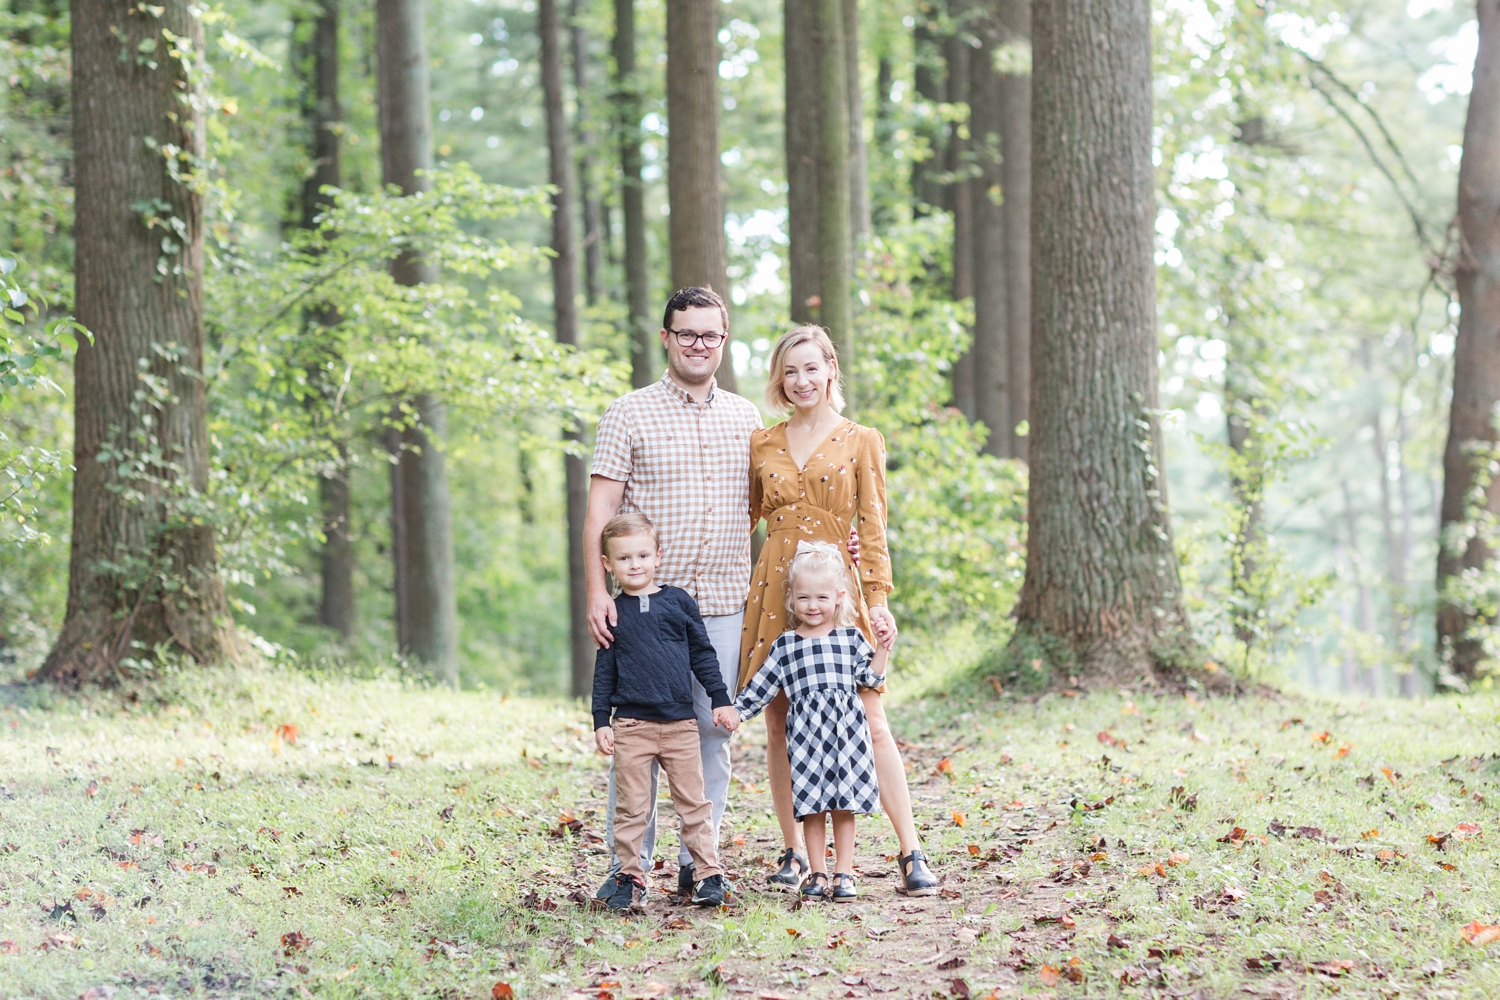  See more from the   Robinson-Siemen’s family session at Loch Raven Reservoir here  ! 